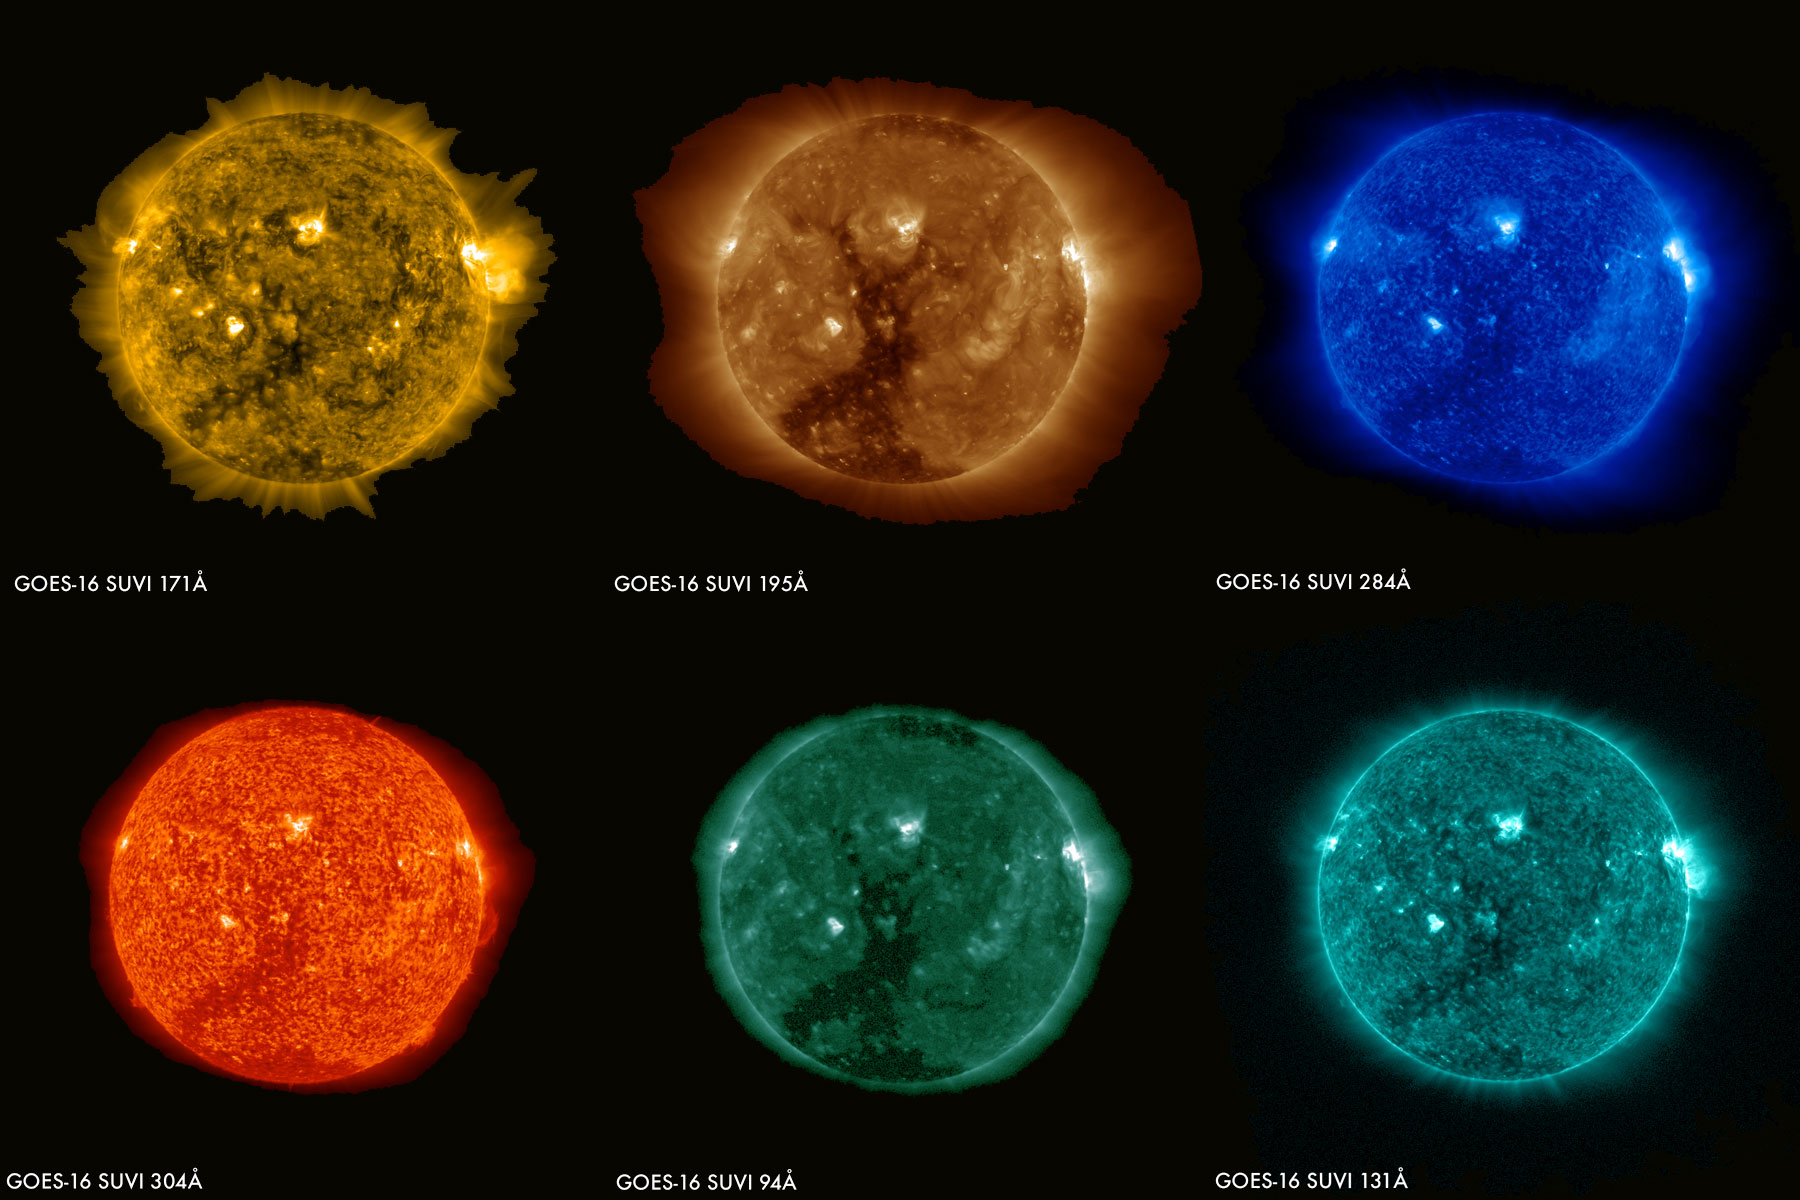 These images of the sun were captured at the same time on January 29, 2017 by the six channels on the SUVI instrument on board GOES-16.